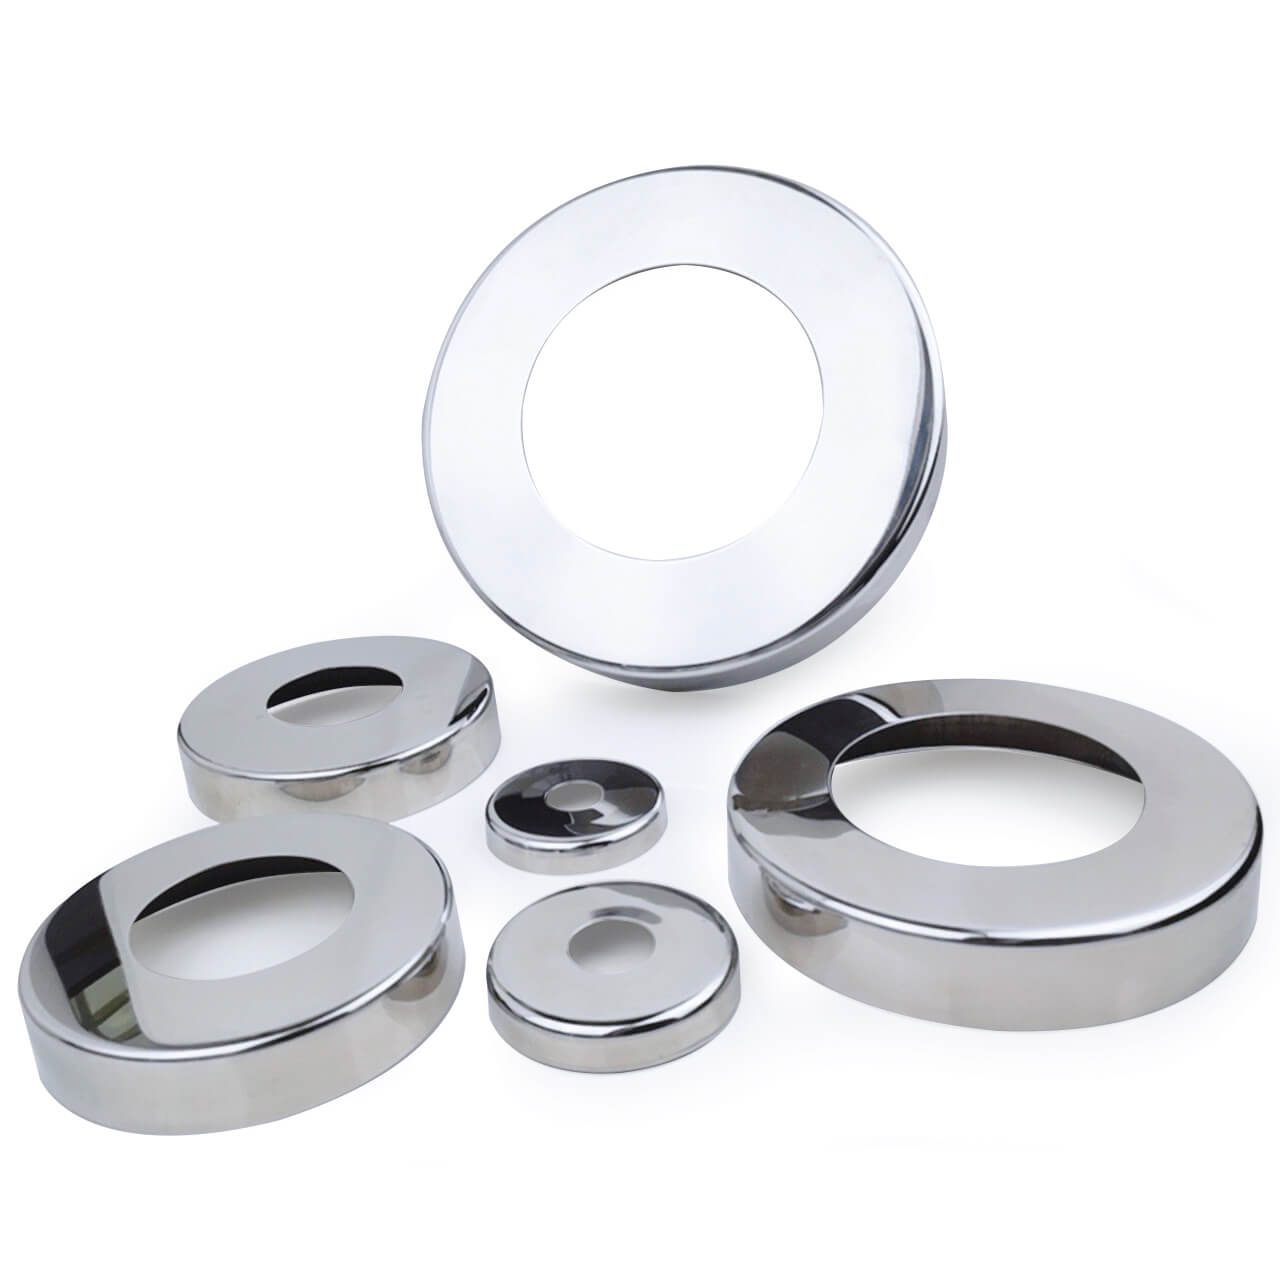 Customized Satin Finish Stainless Steel Round Shape Base Cover Fittings for Balustrade Post